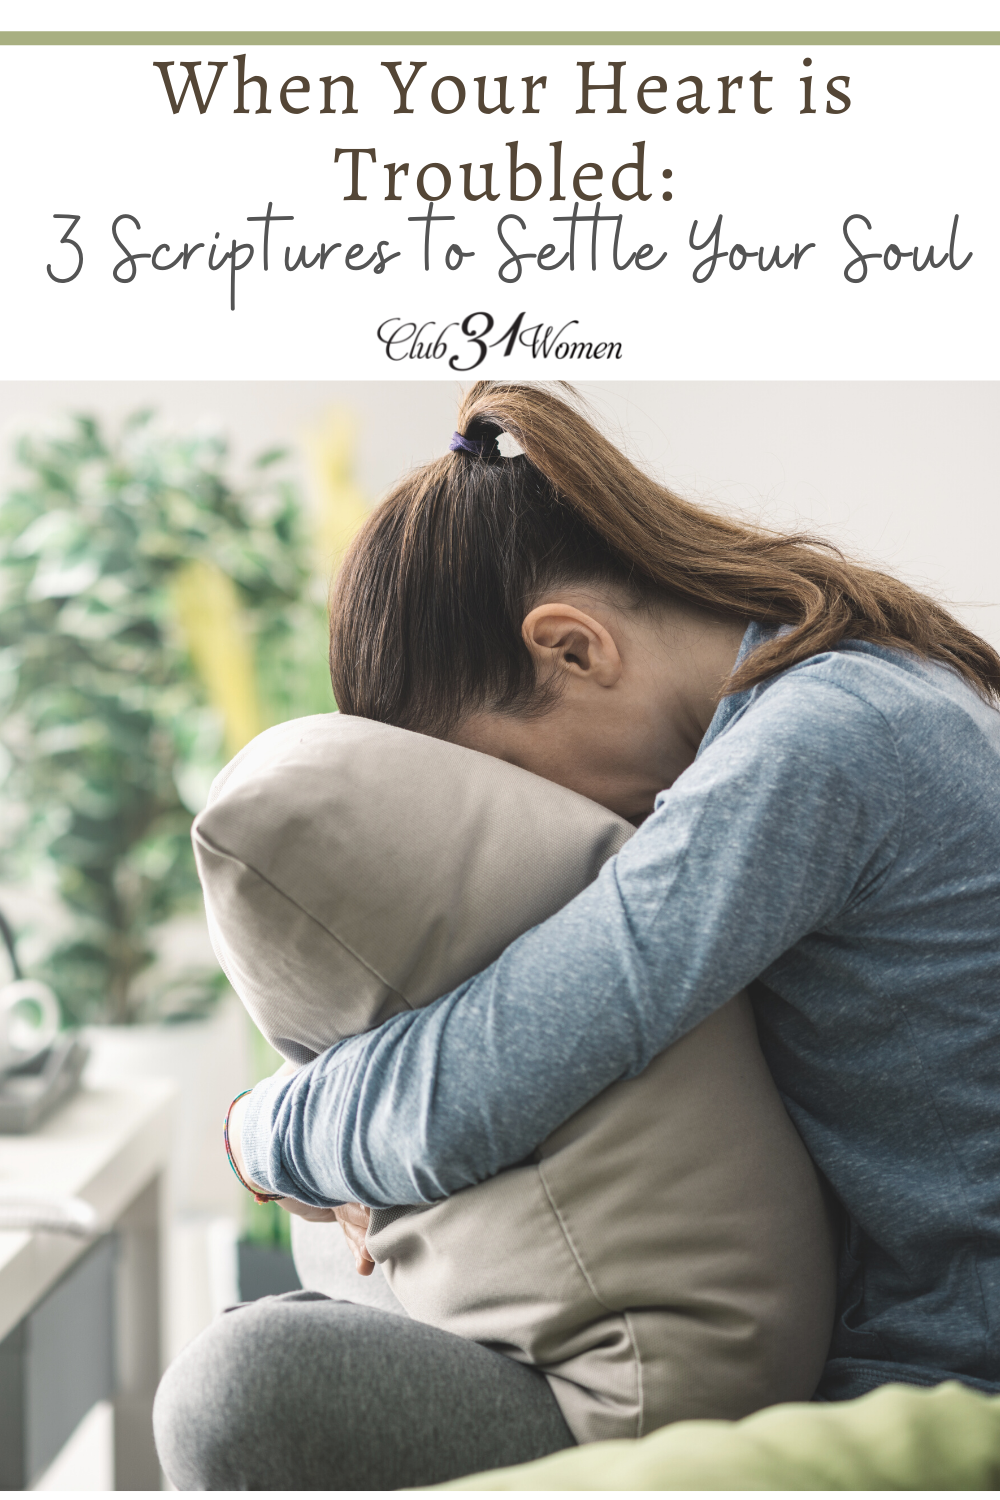 When Your Heart Is Troubled: 3 Scriptures to Settle Your Soul via @Club31Women